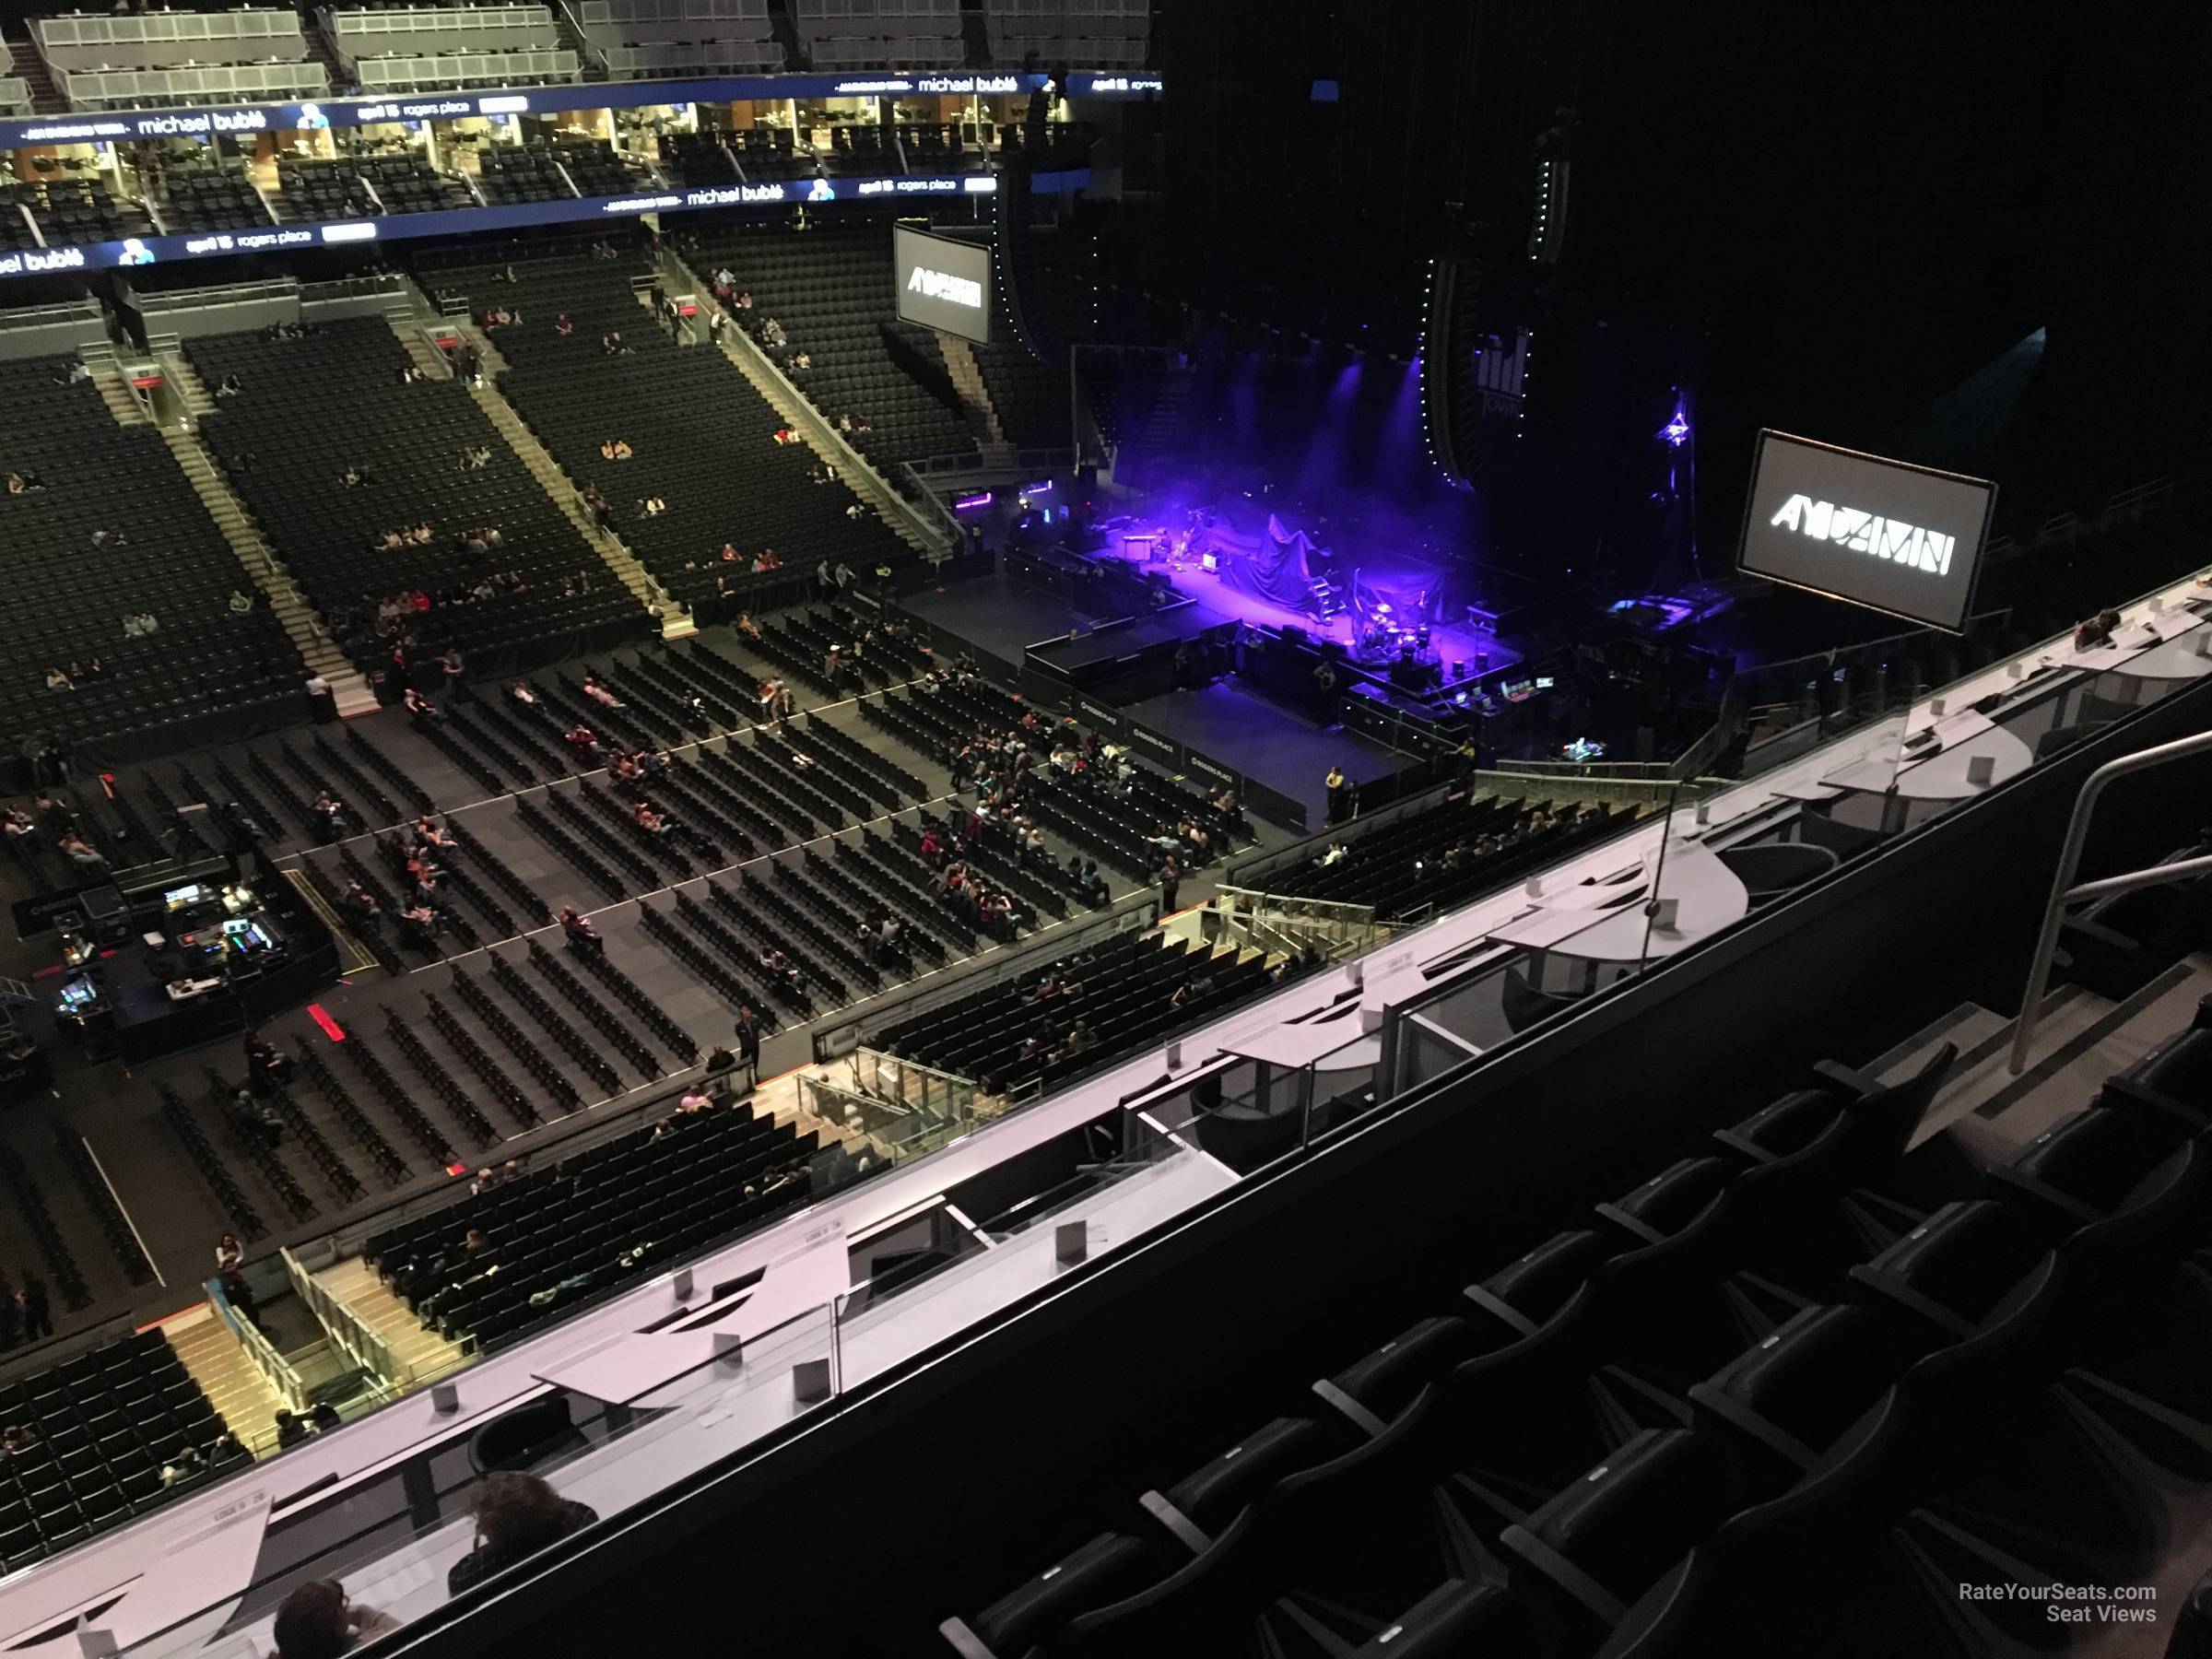 section 205, row 5 seat view  for concert - rogers place